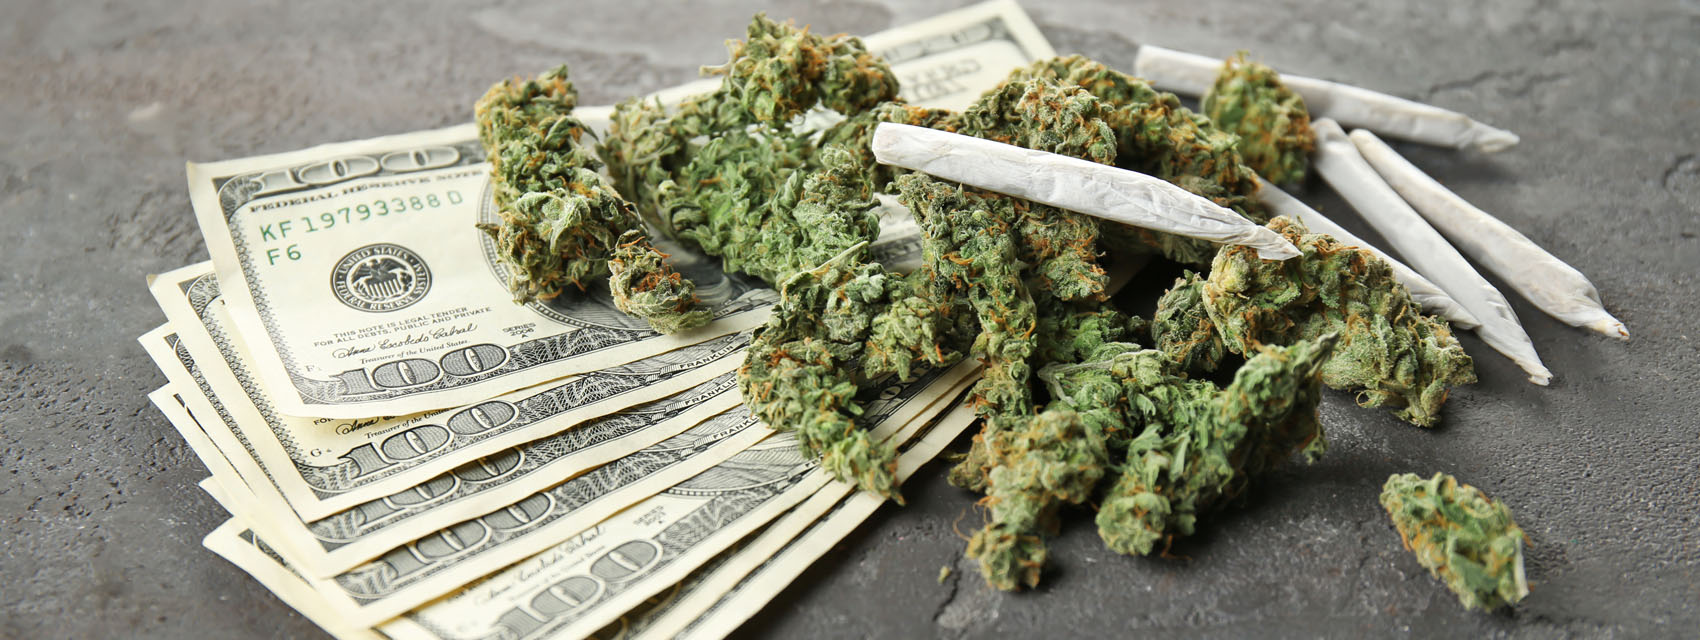 What To Know Before Legally Buying Weed What To Know Before Legally Buying Weed